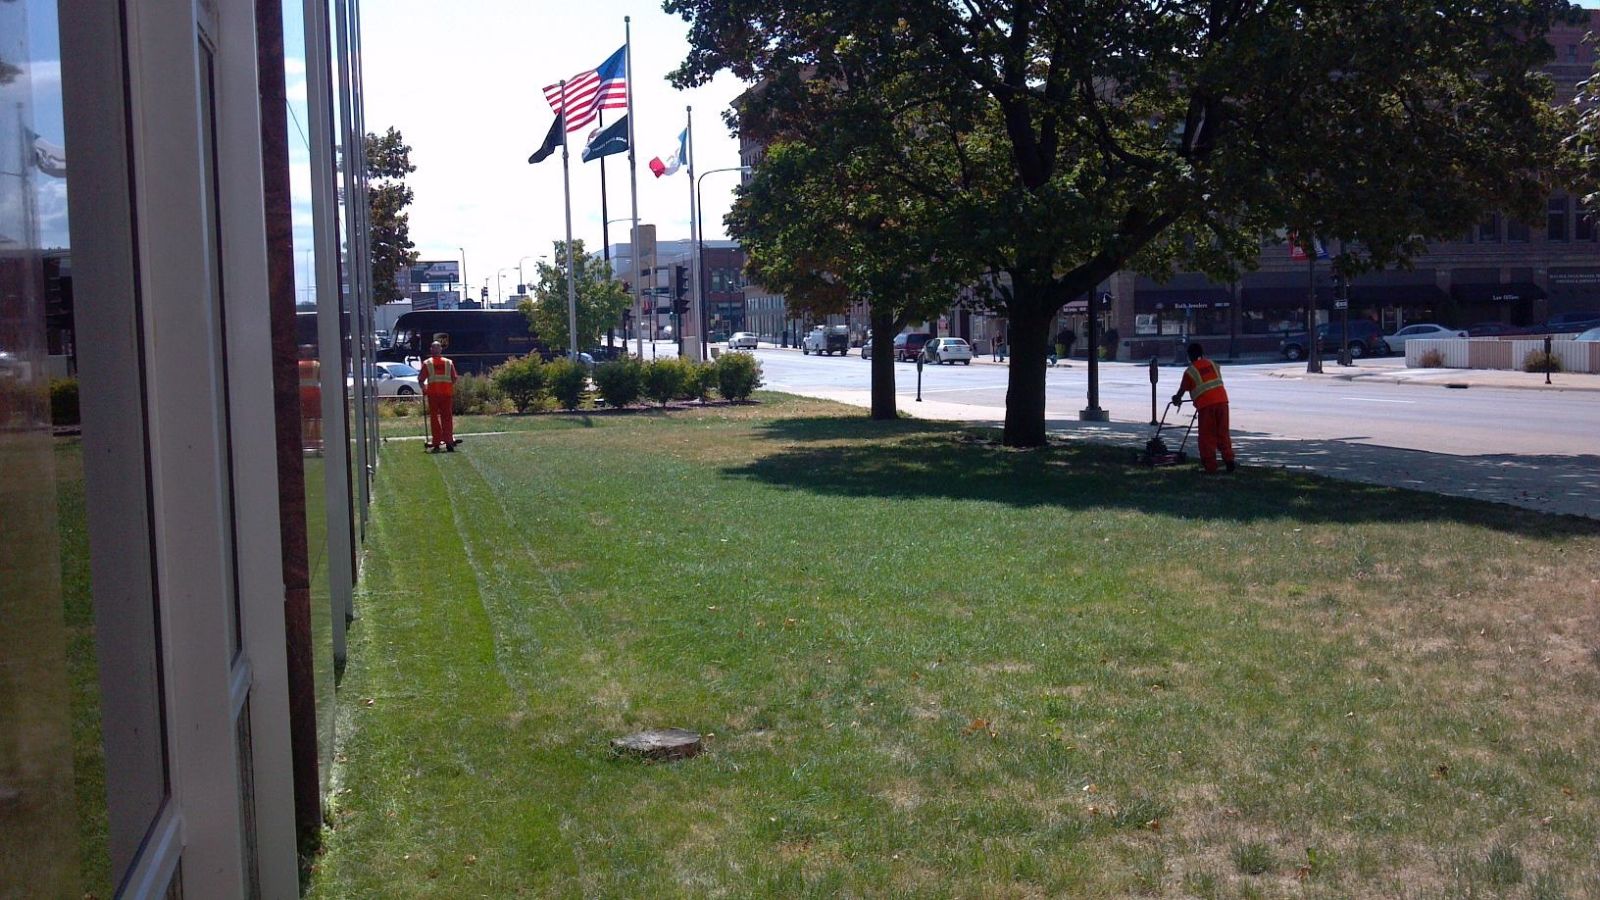 Courthouse lawn being mowed by inmates